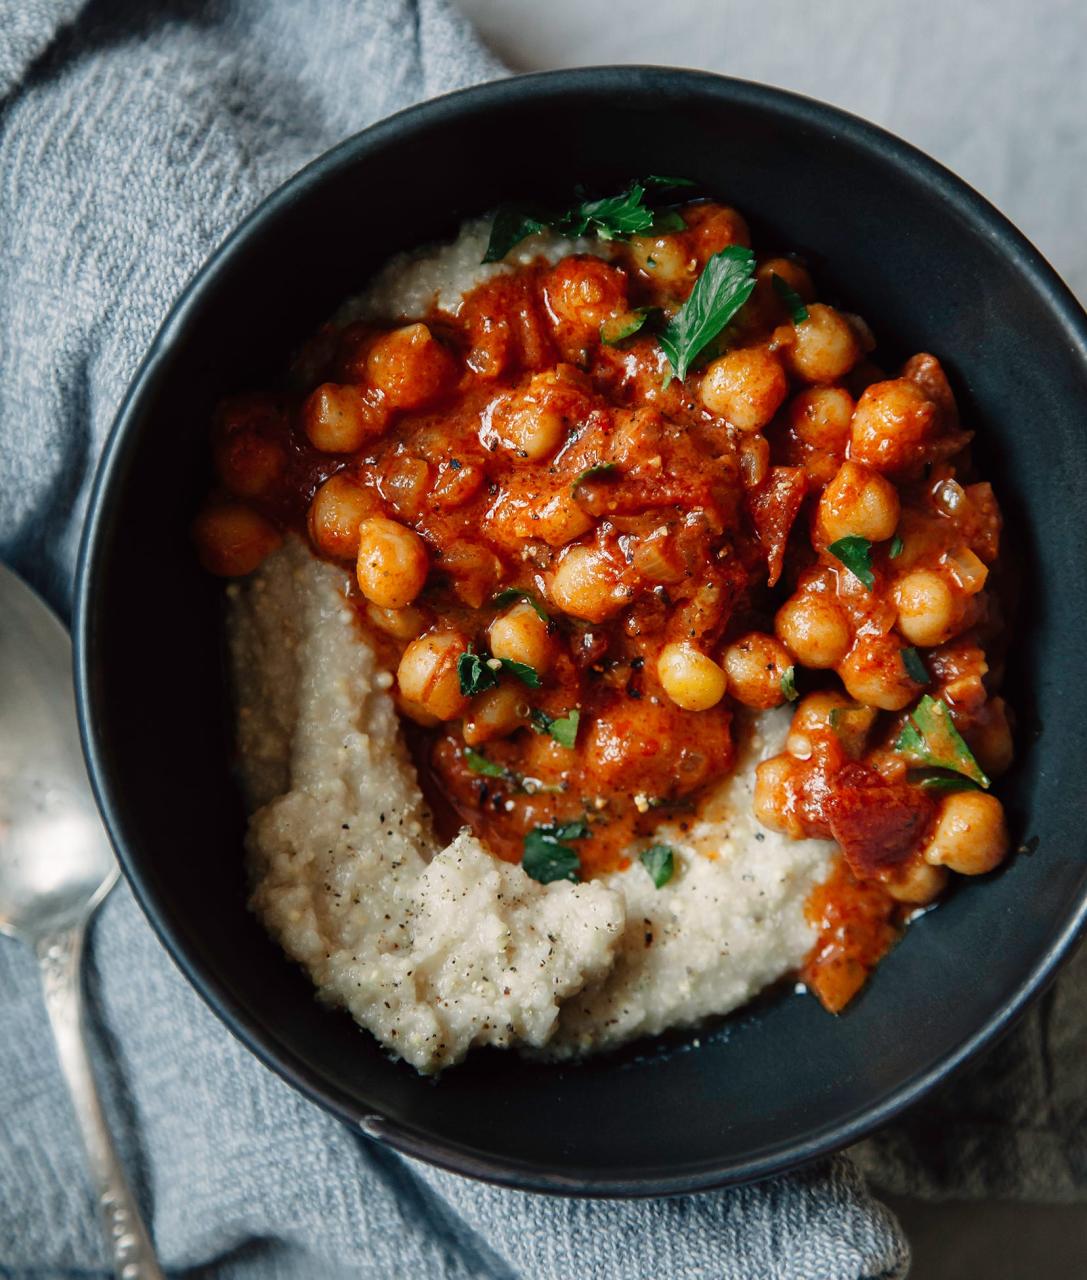 Seven Spice Chickpea Stew with Tomatoes and Coconut